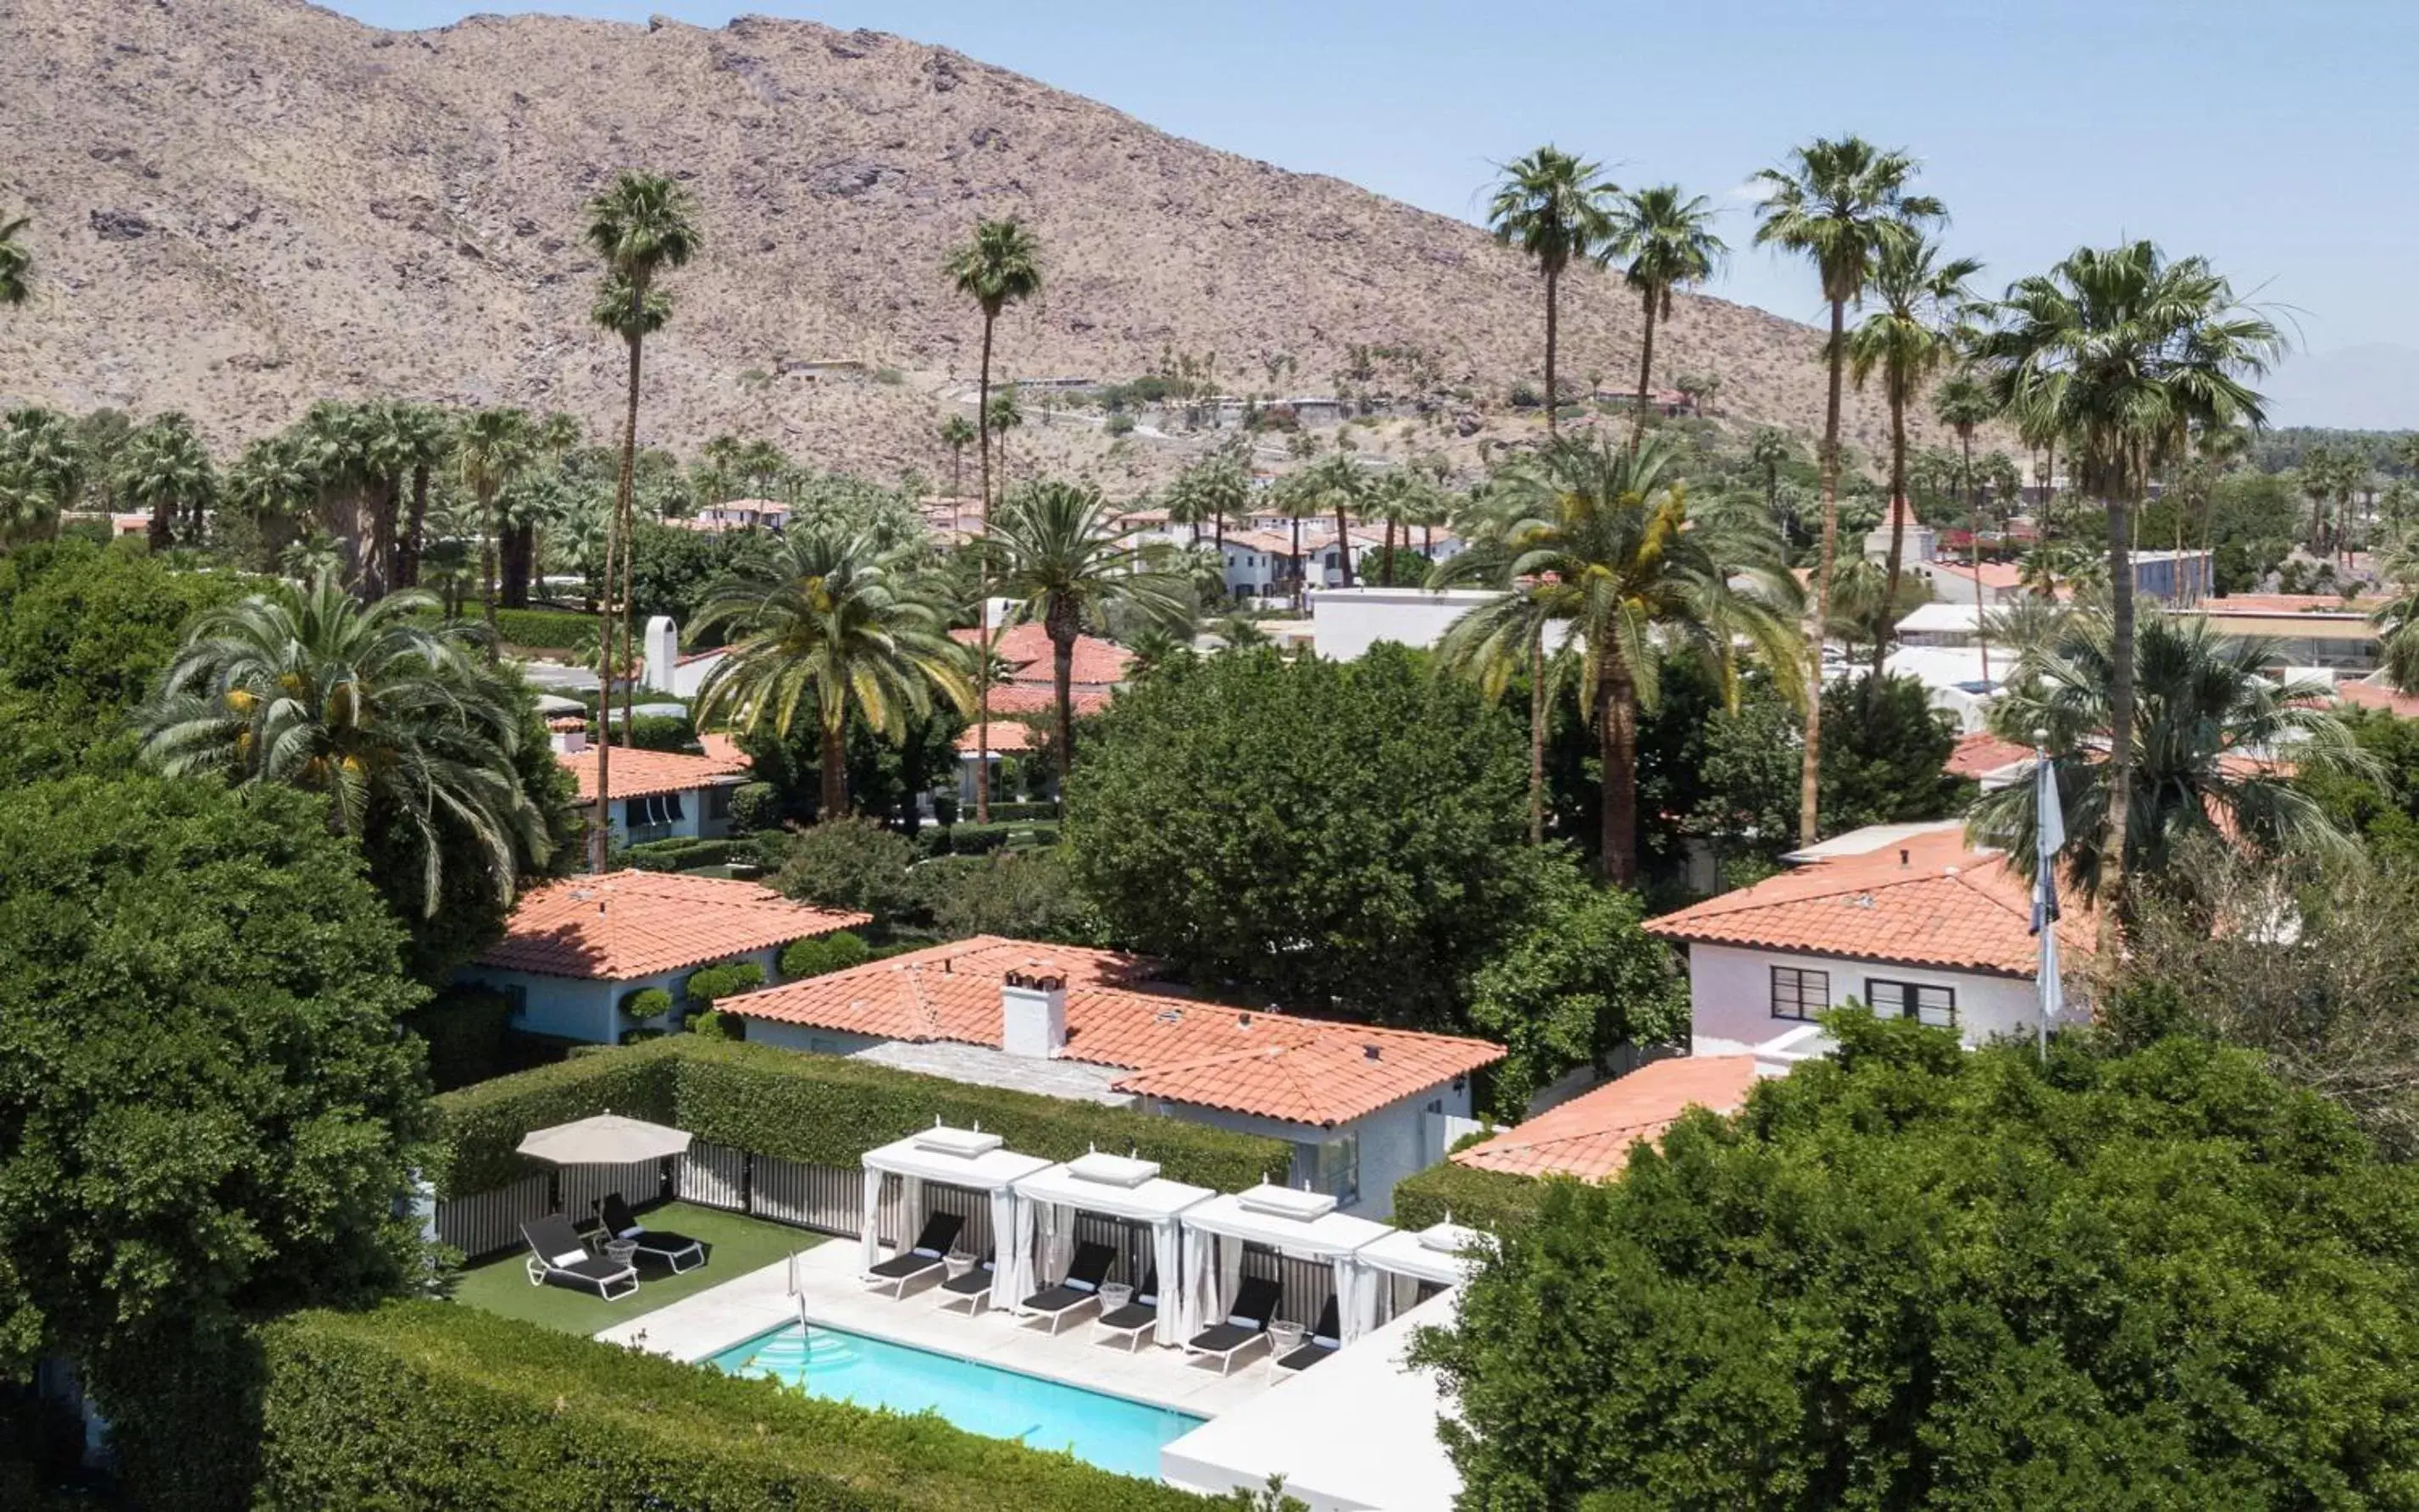 Bird's eye view, Pool View in Avalon Hotel and Bungalows Palm Springs